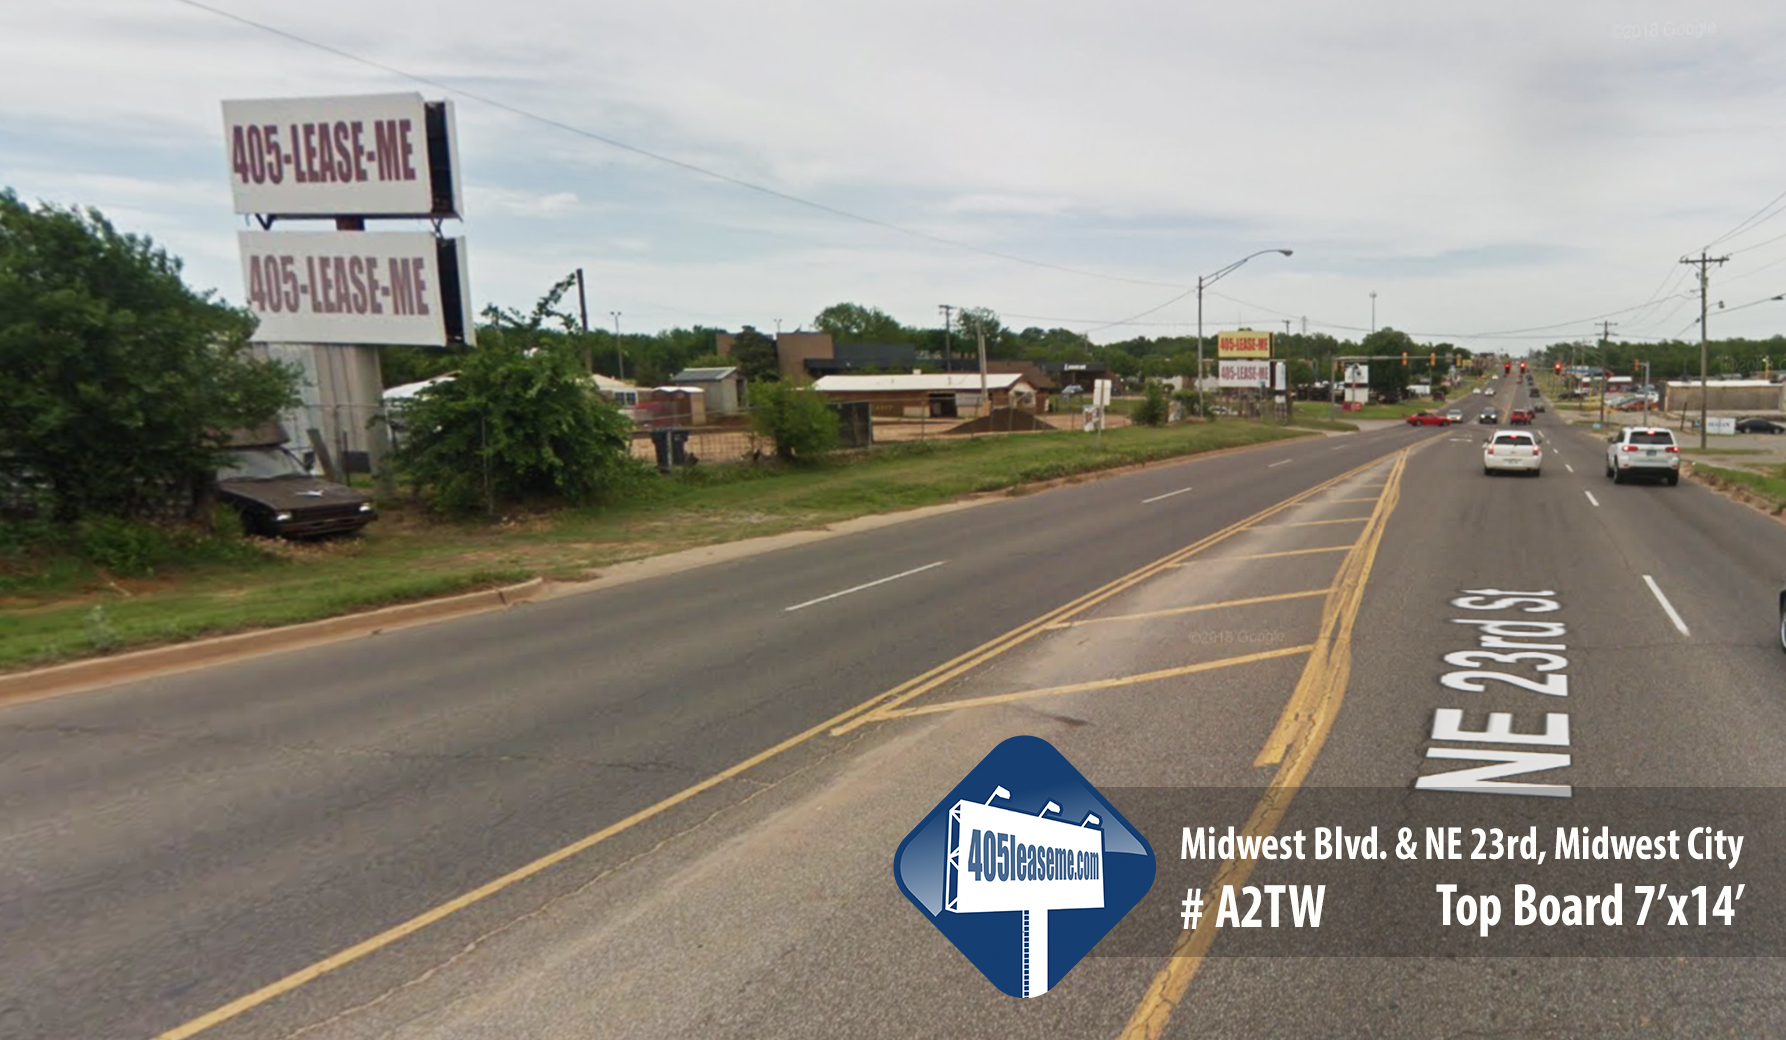 9 Midwest City - A2TW